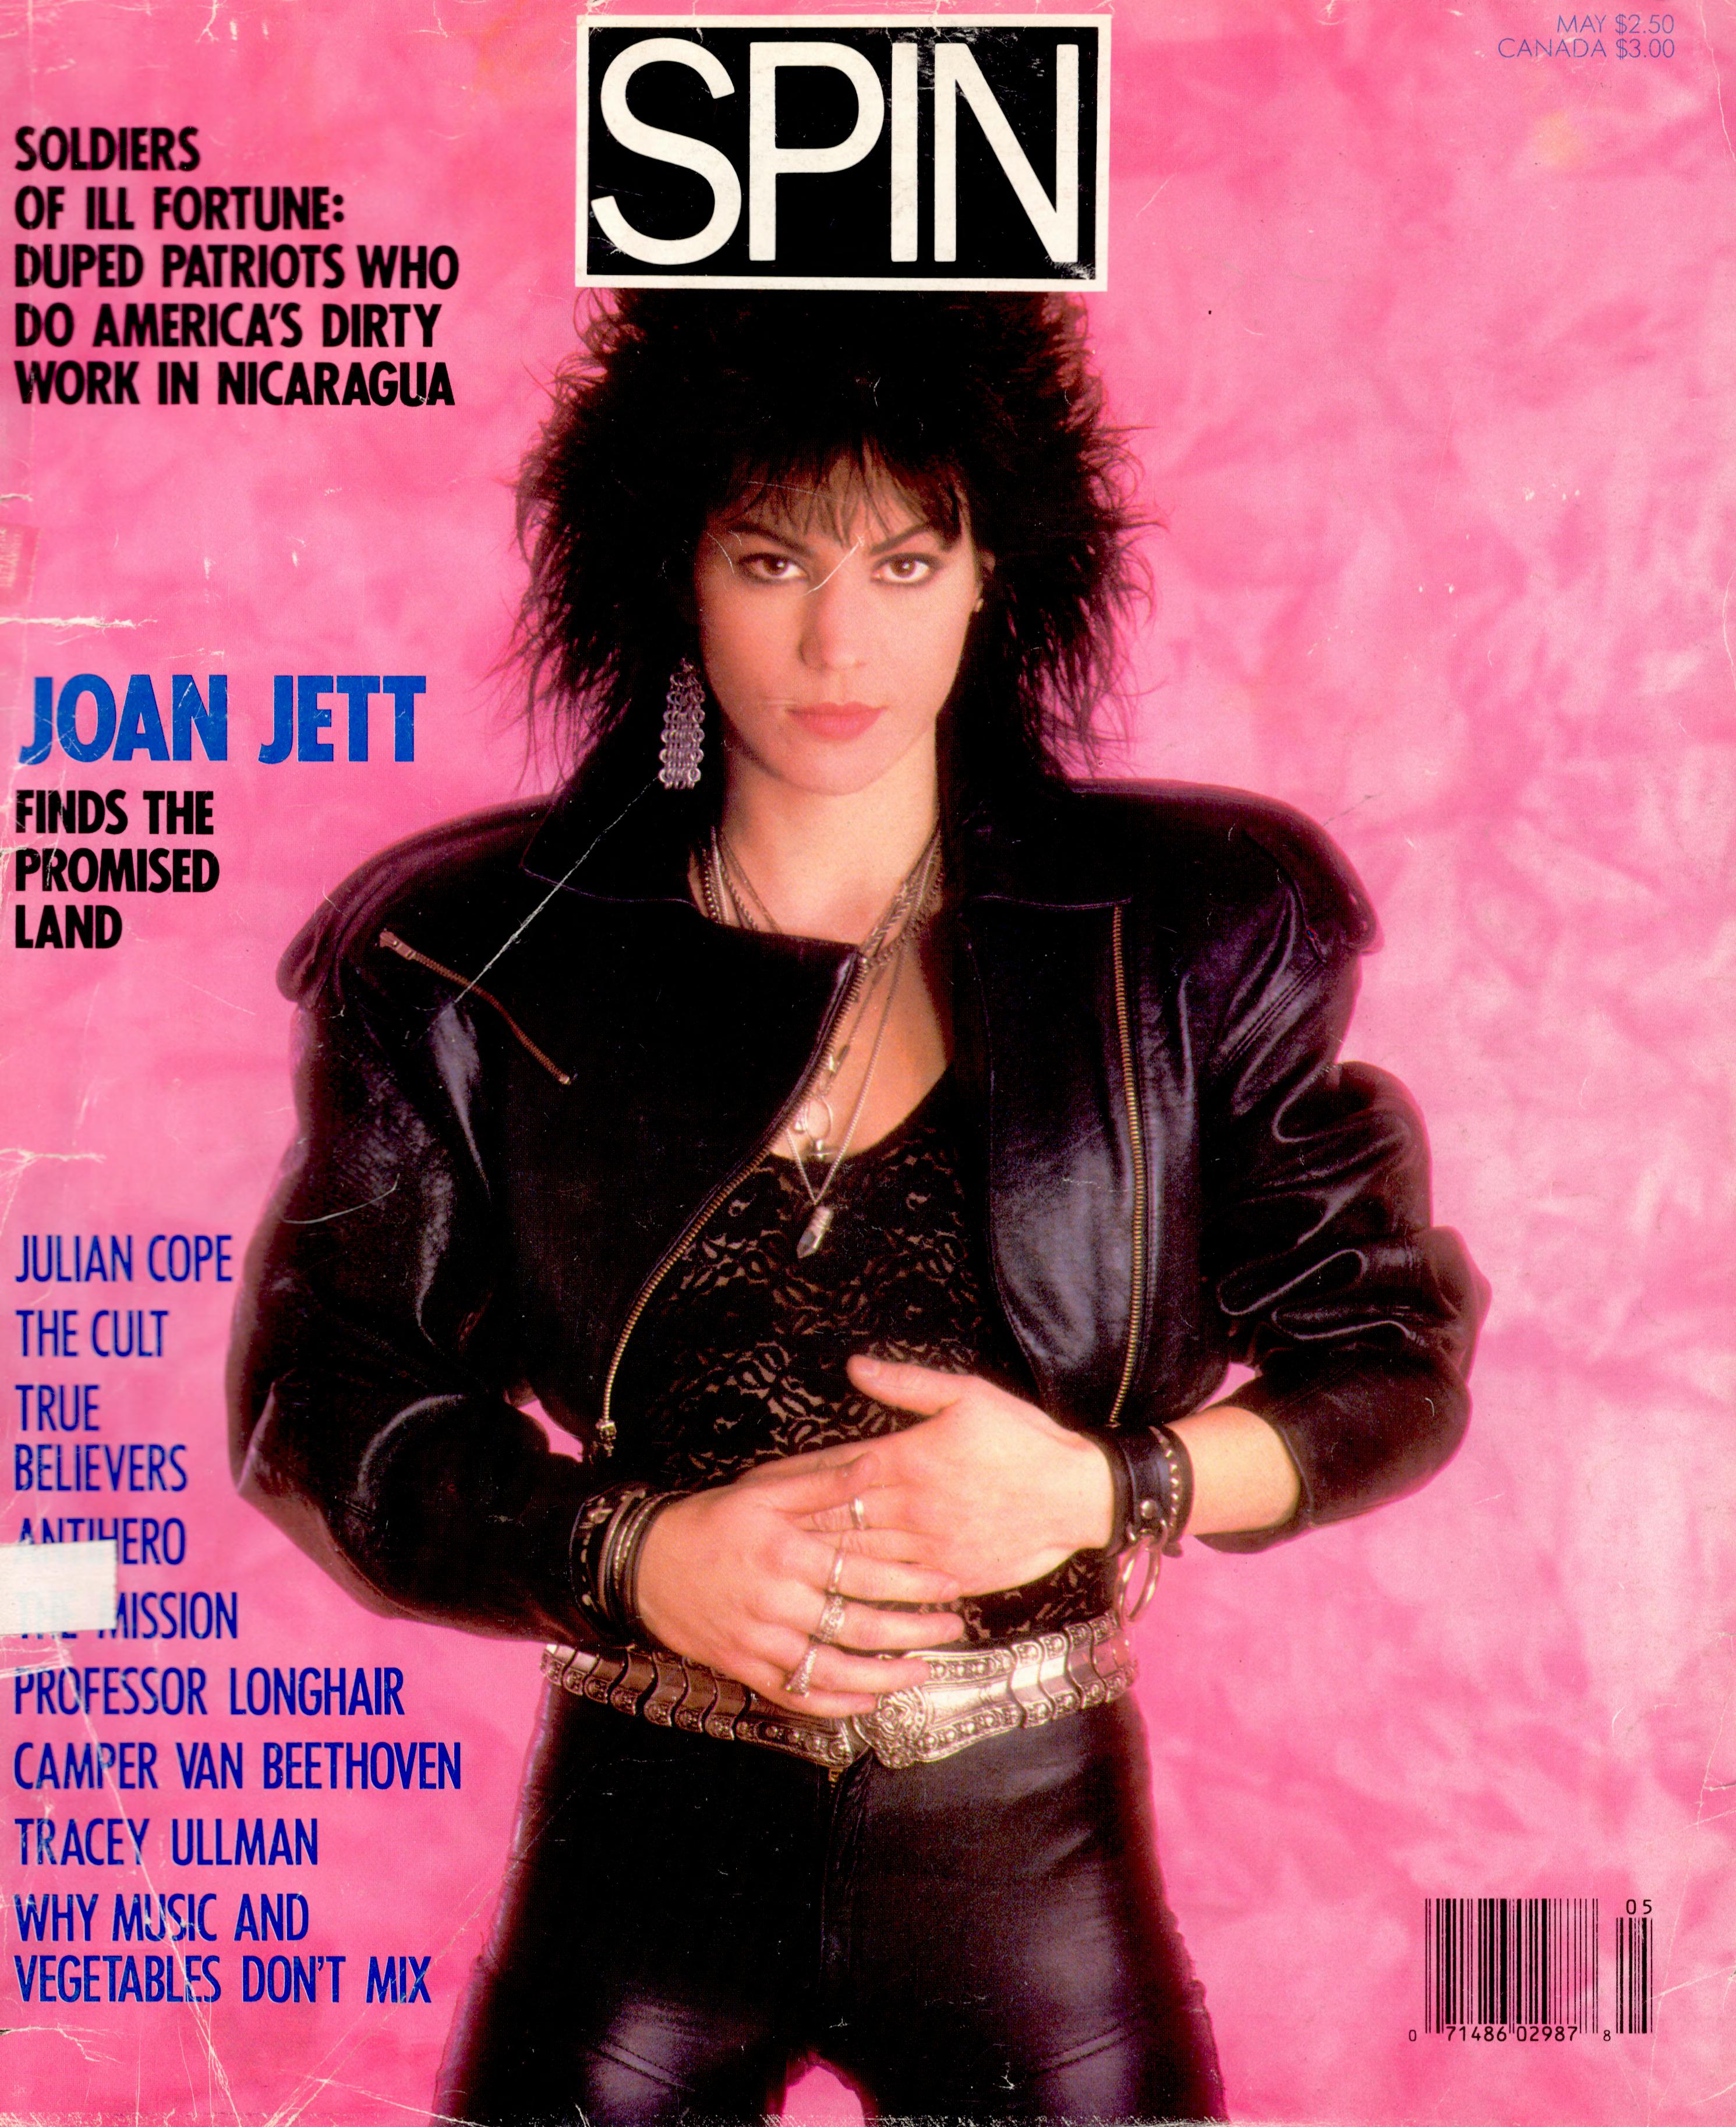 Joan Jett Finds the Promised Land